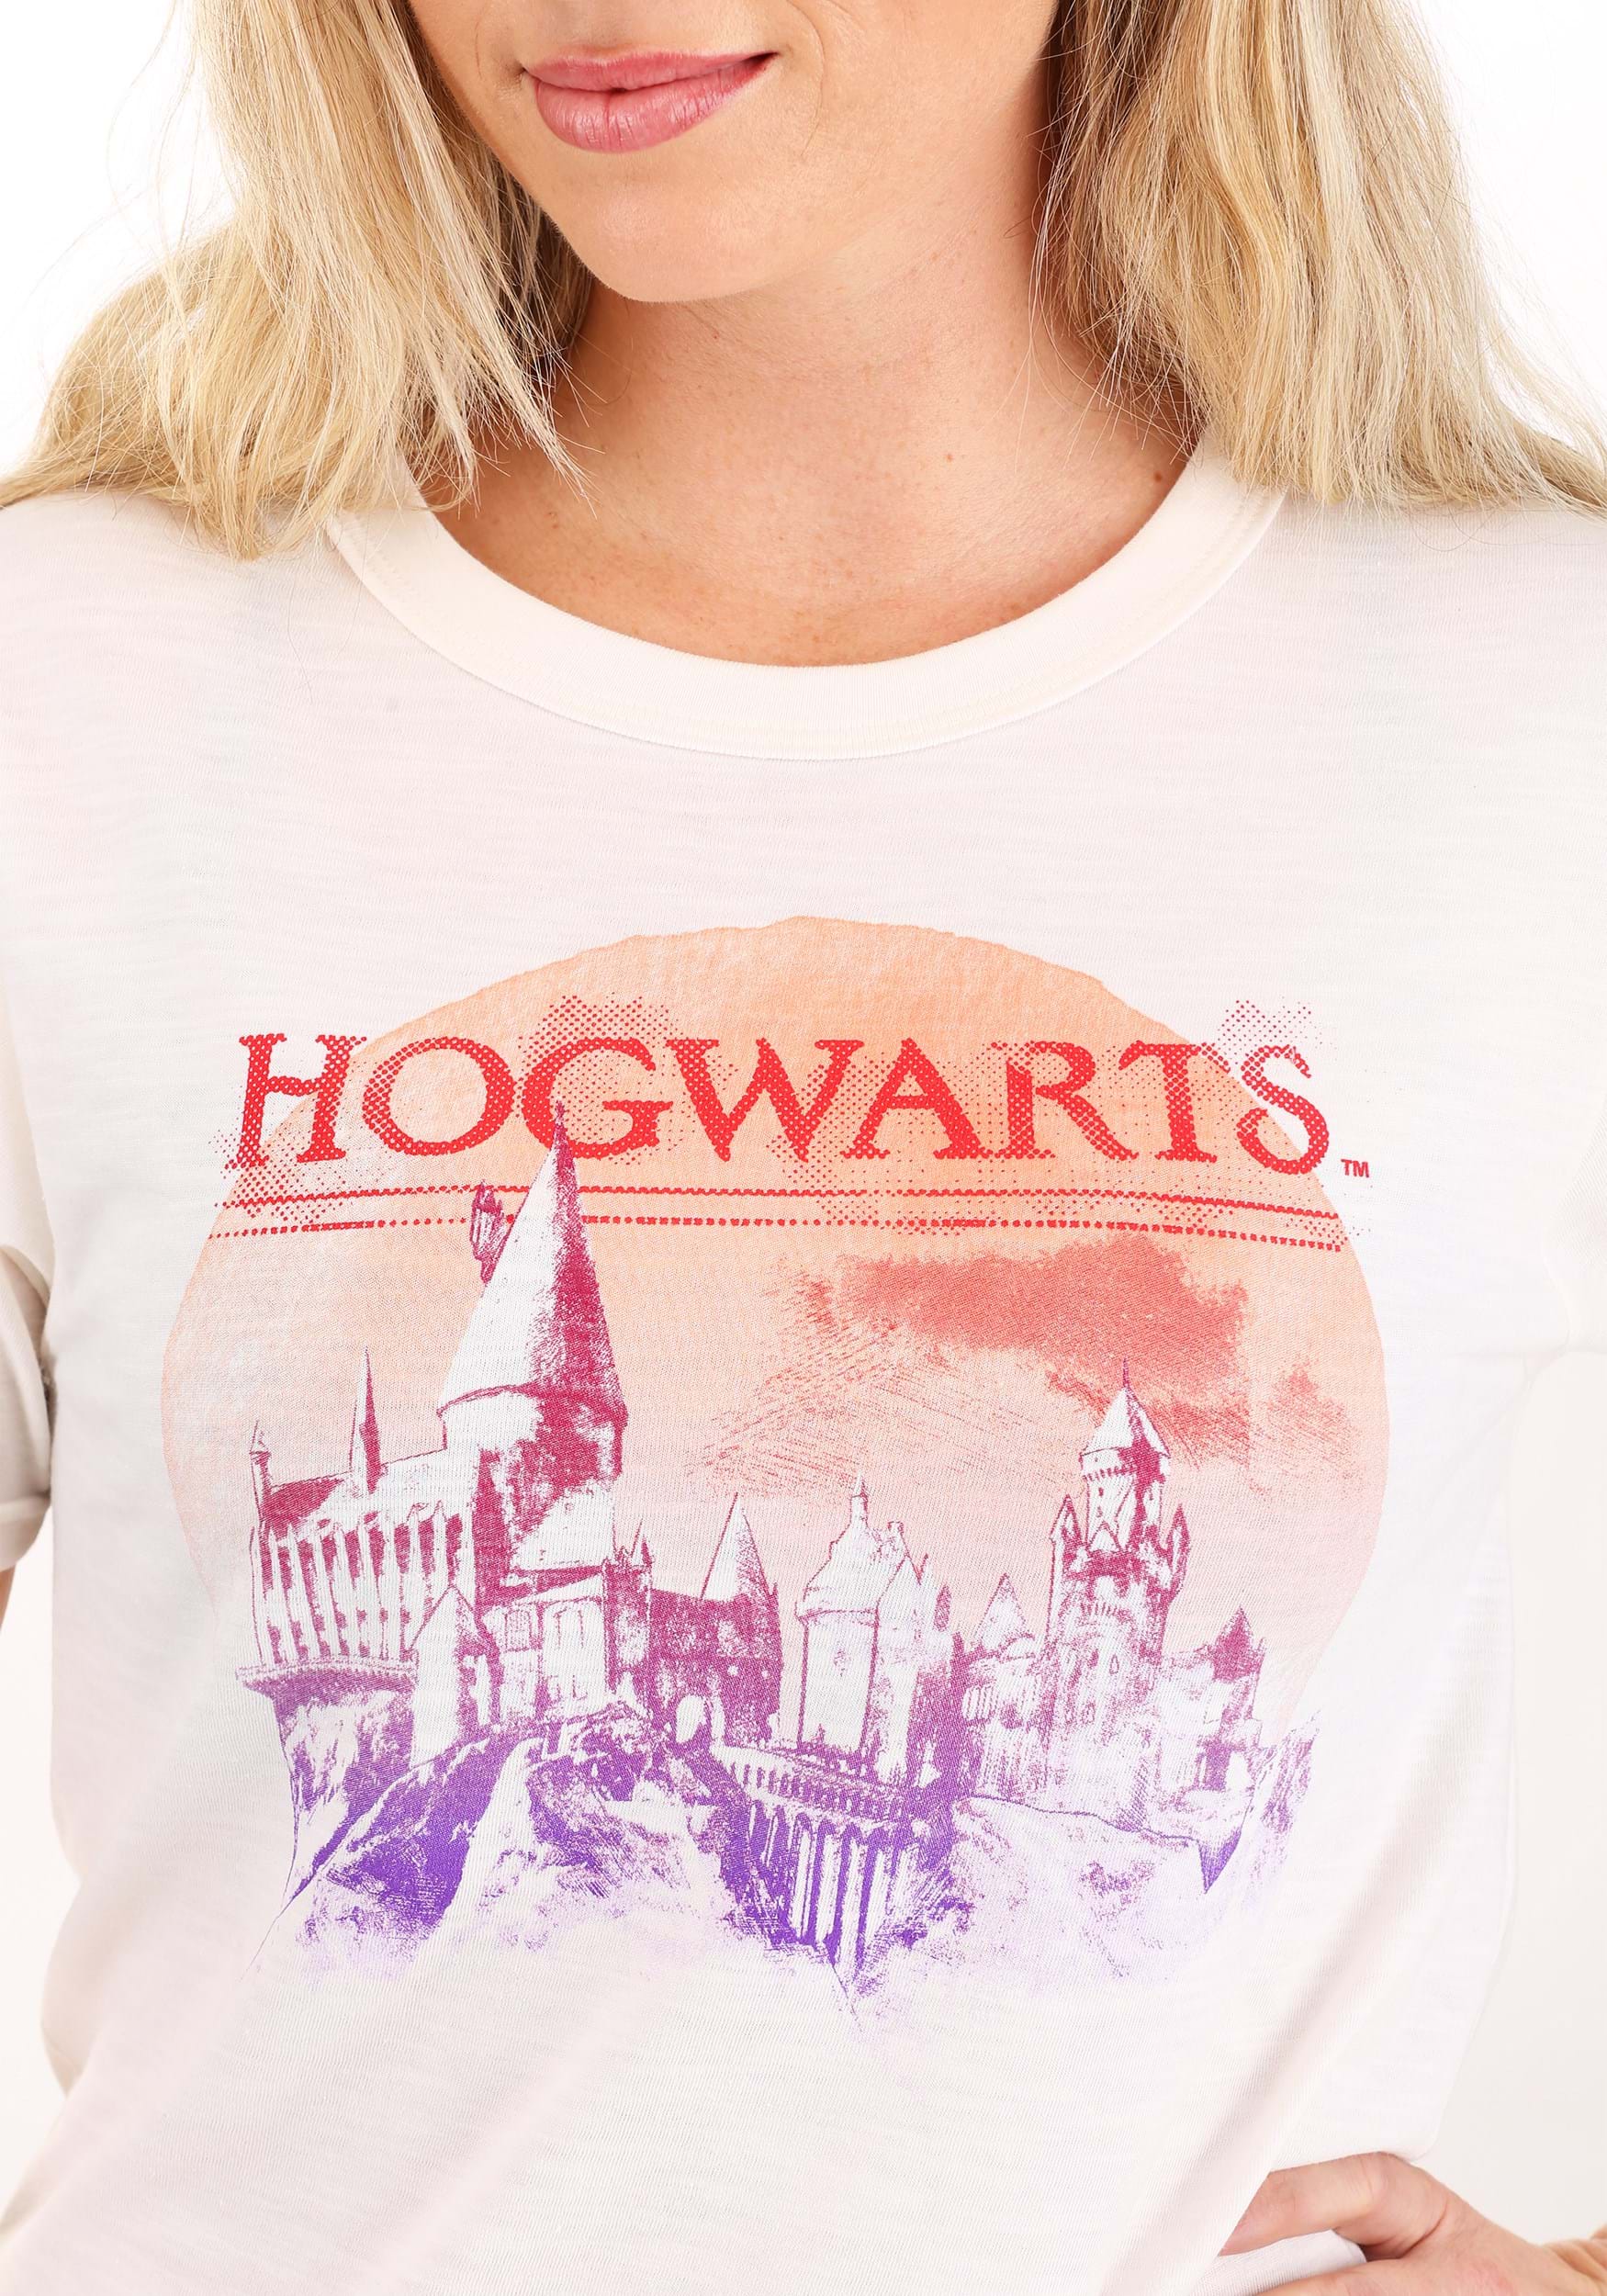 Adults for Harry Moon Potter T-Shirt Hogwarts Red